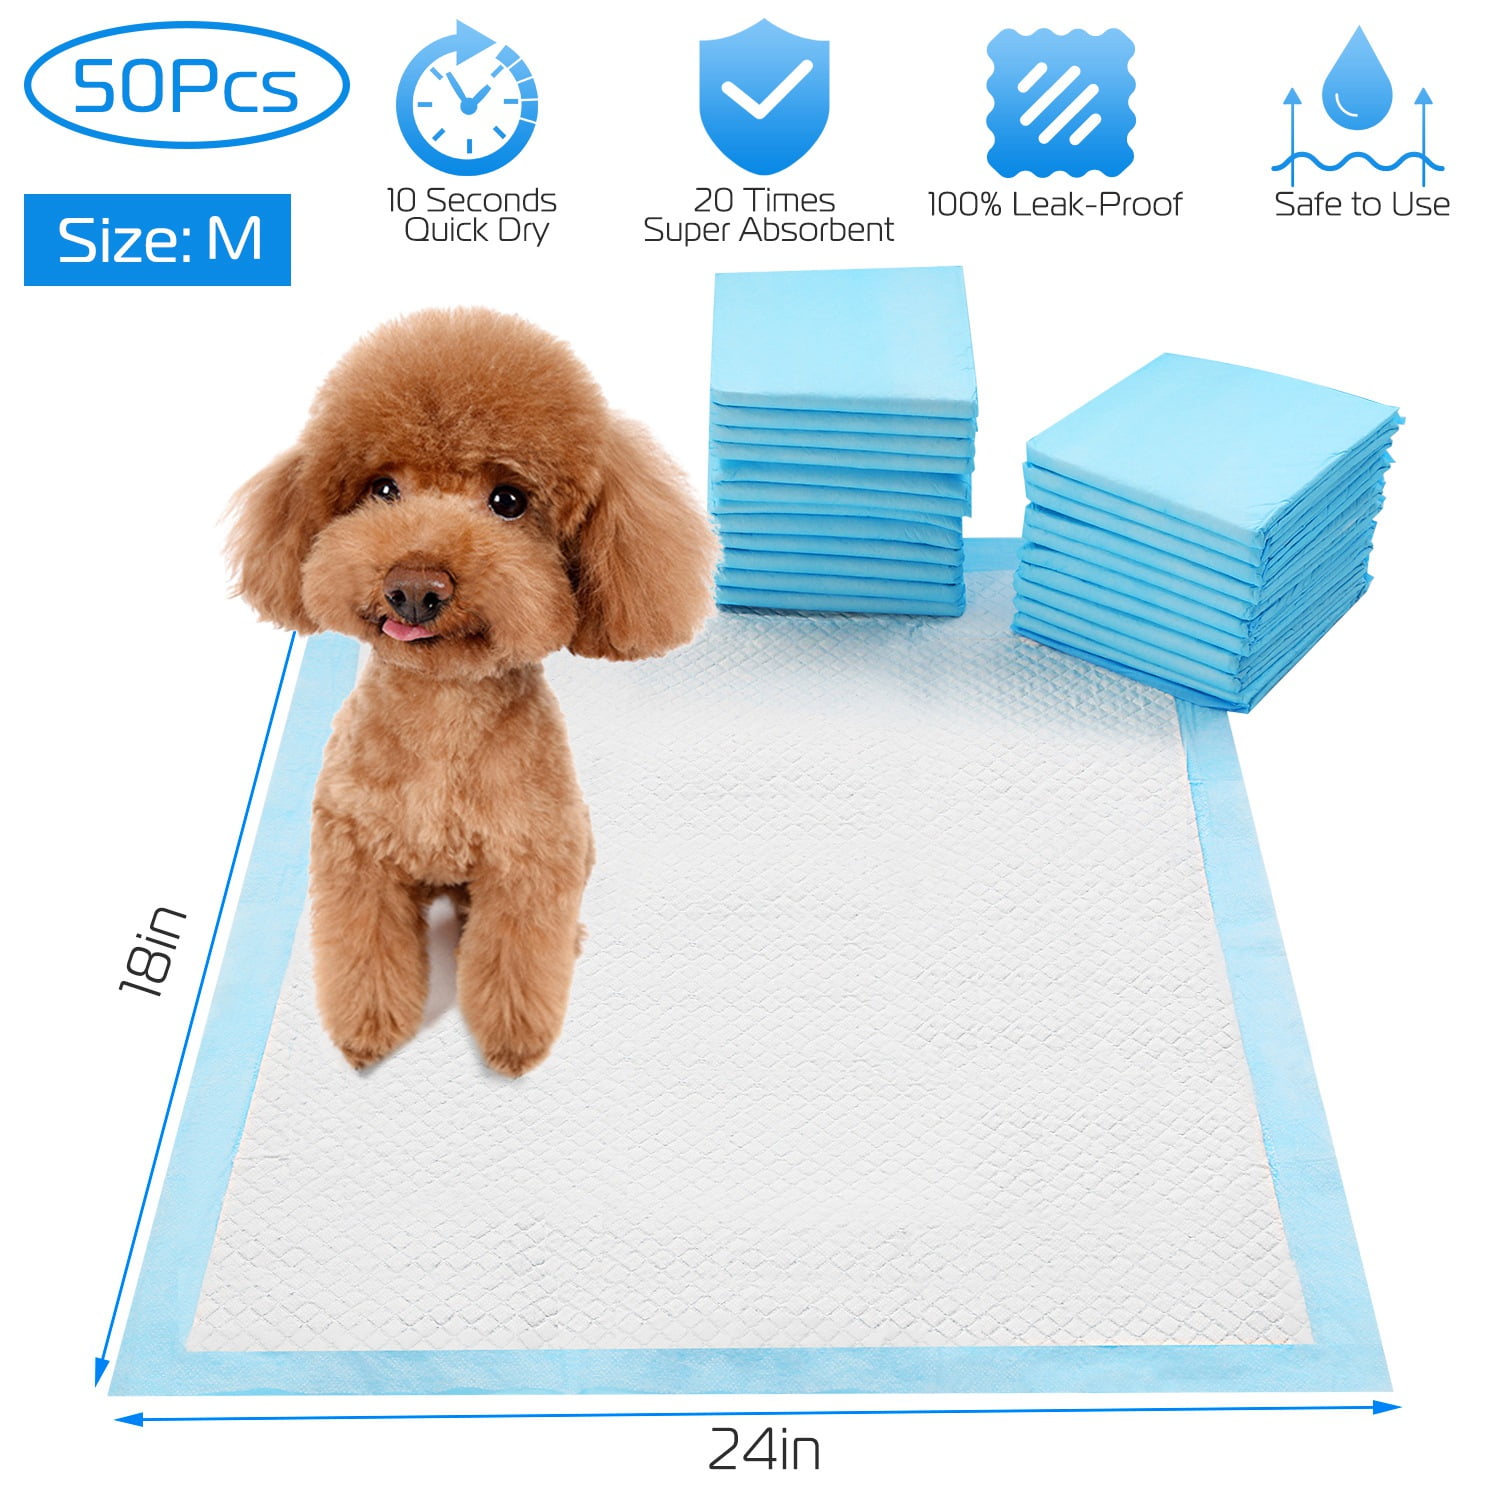 310 30x36 Dog Puppy Training Wee Wee Pee Pads Underpads MEDICAL GRADE 